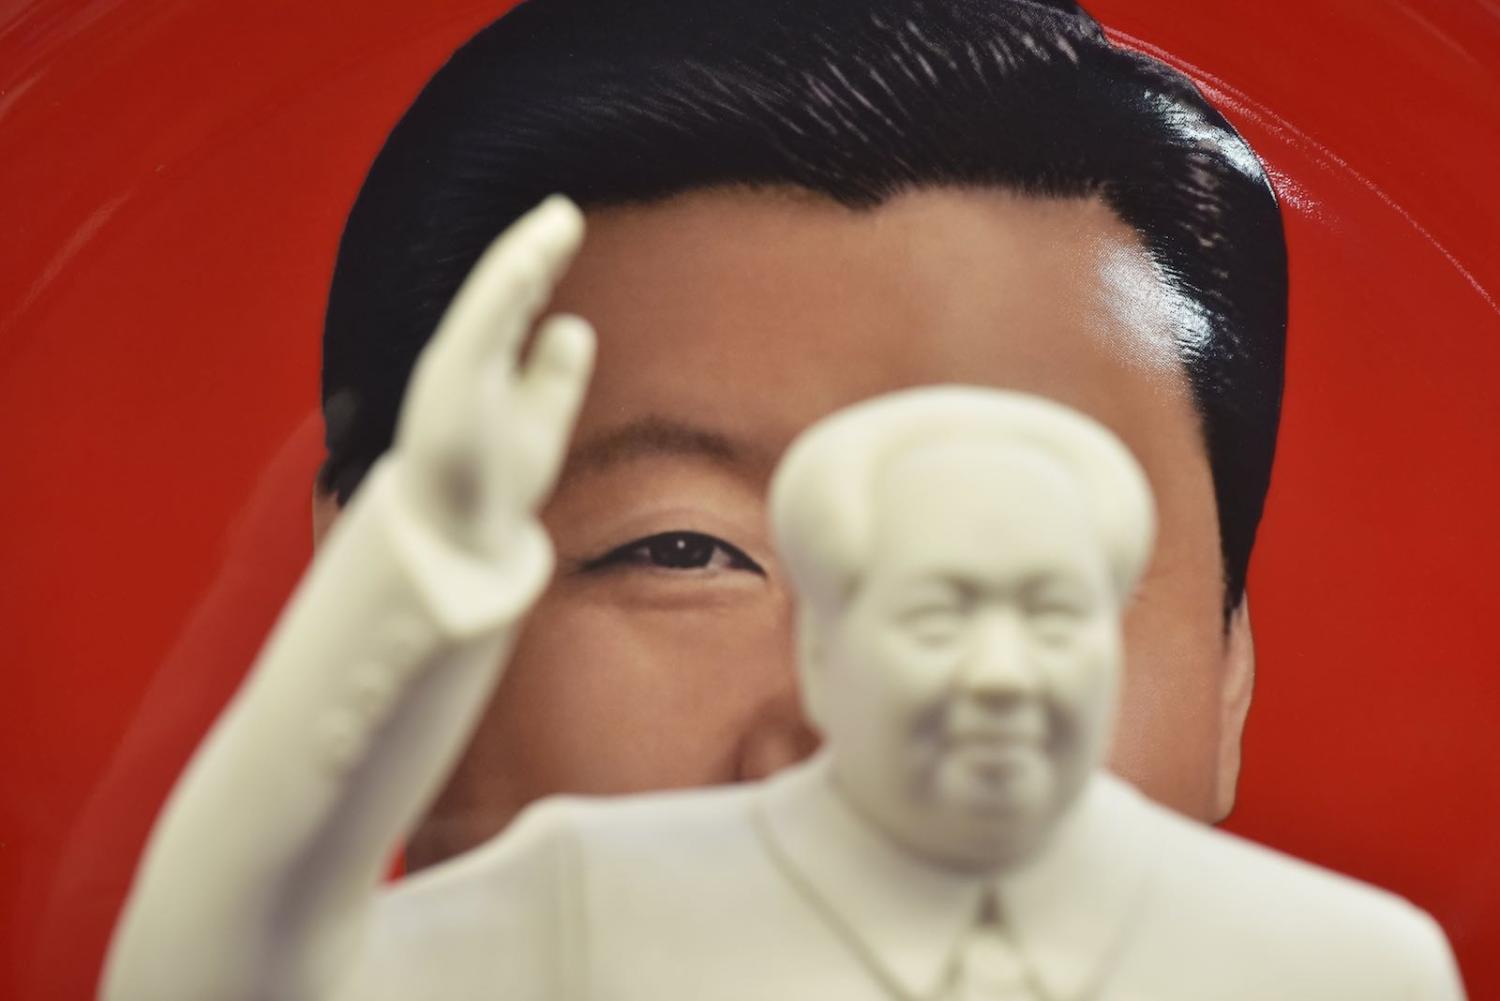 A decorative plate featuring an image of China’s President Xi Jinping is seen behind a statue of late communist leader Mao Zedong at a souvenir store next to Tiananmen Square in Beijing (Greg Baker/AFP/Getty Images)